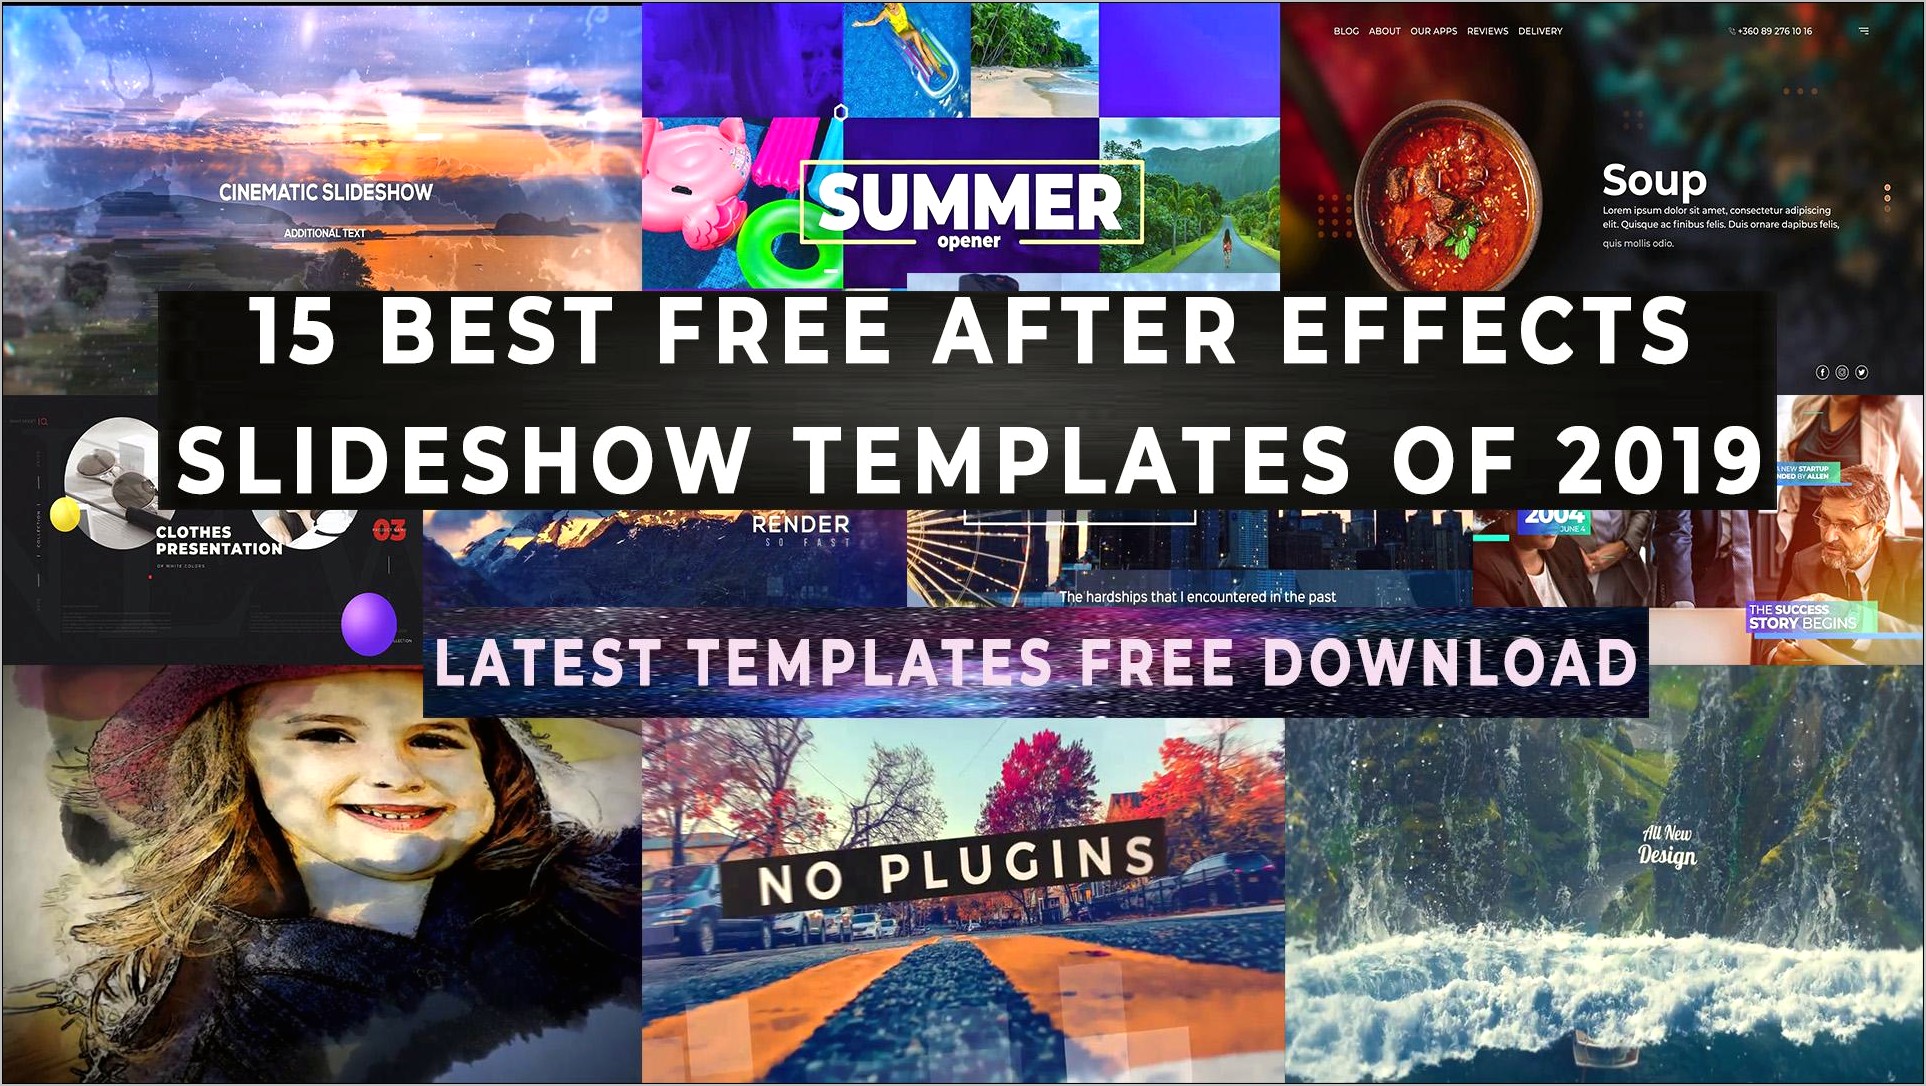 after-effects-free-templates-motion-graphics-resume-gallery